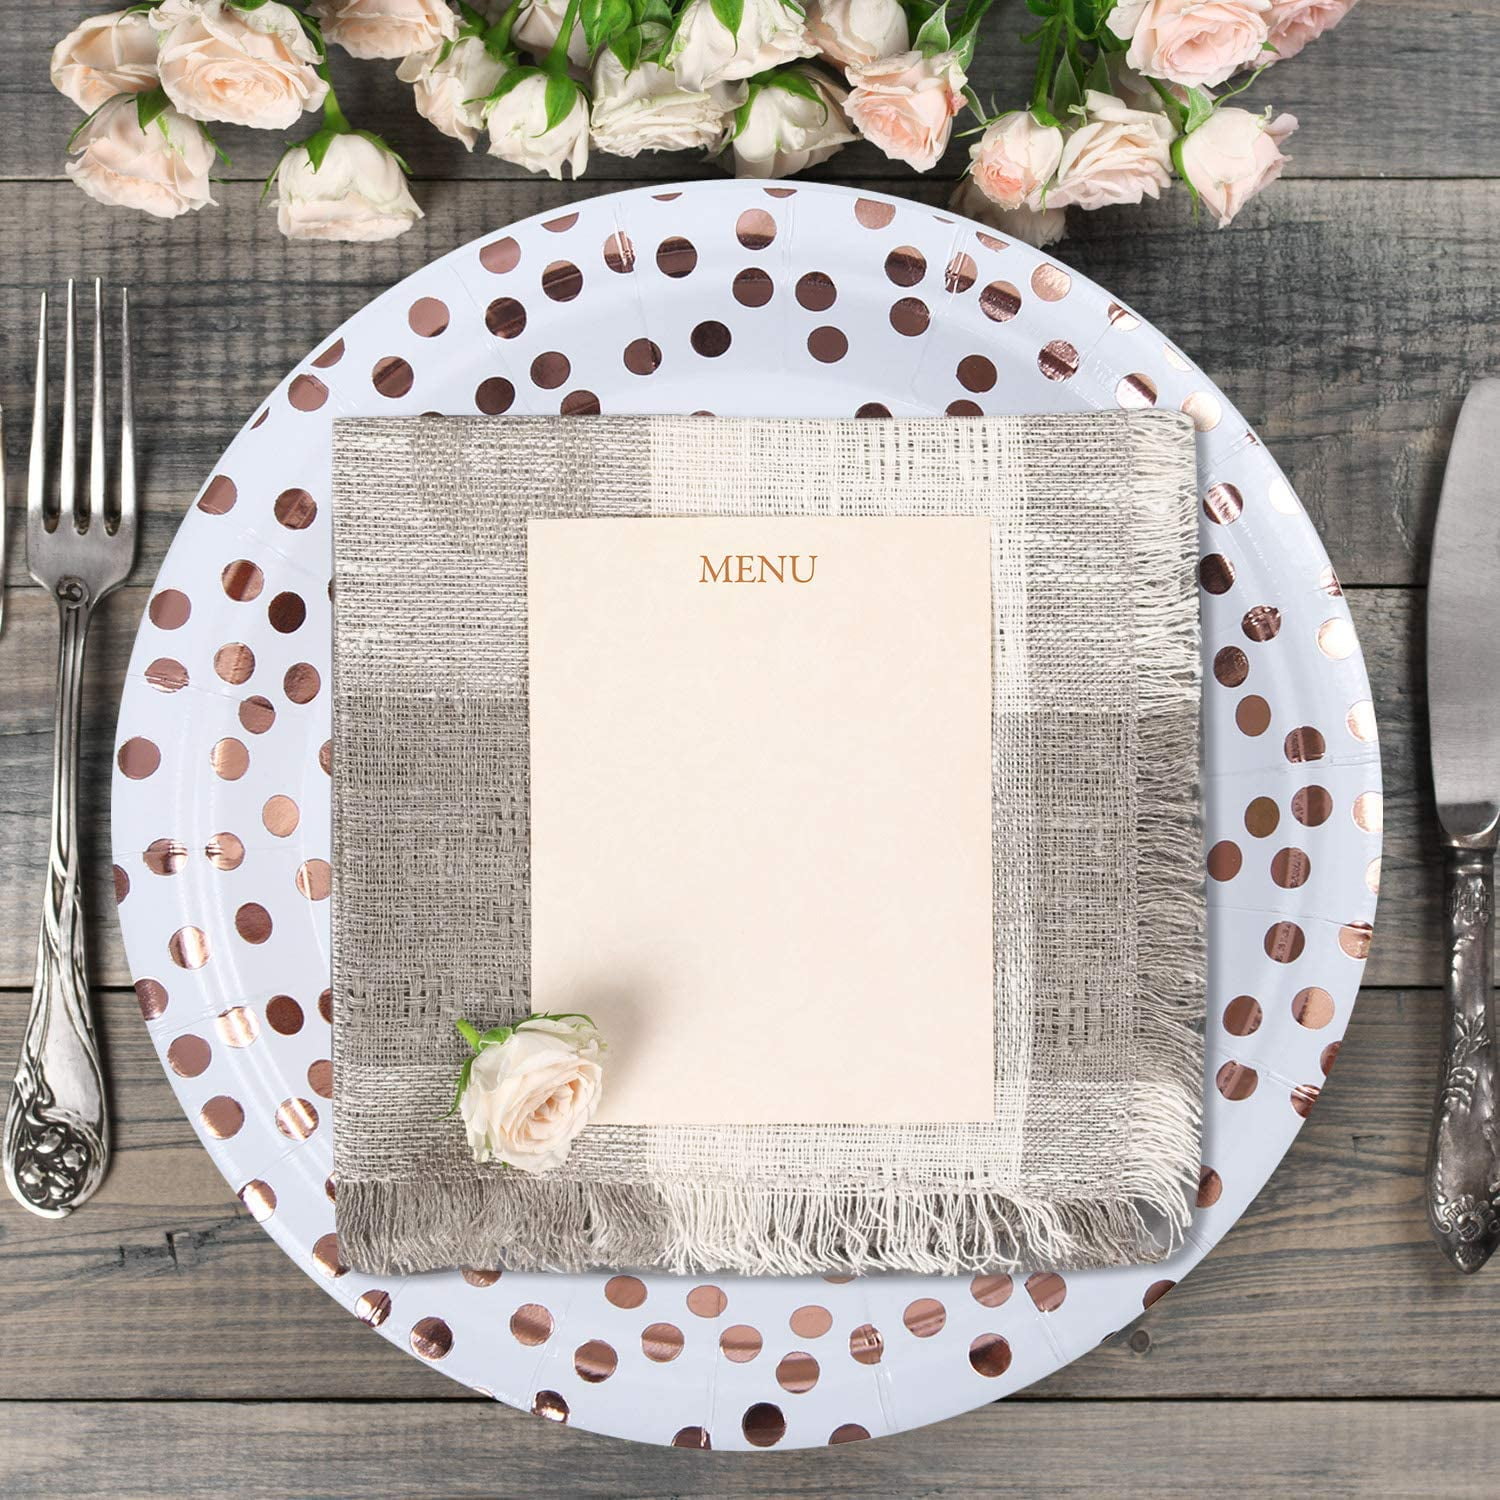 60 pieces Rose Gold Foil Polka Dot Disposable Paper Plates Dinnerware Plates for Party Wedding Anniversary Birthday 7 inches 